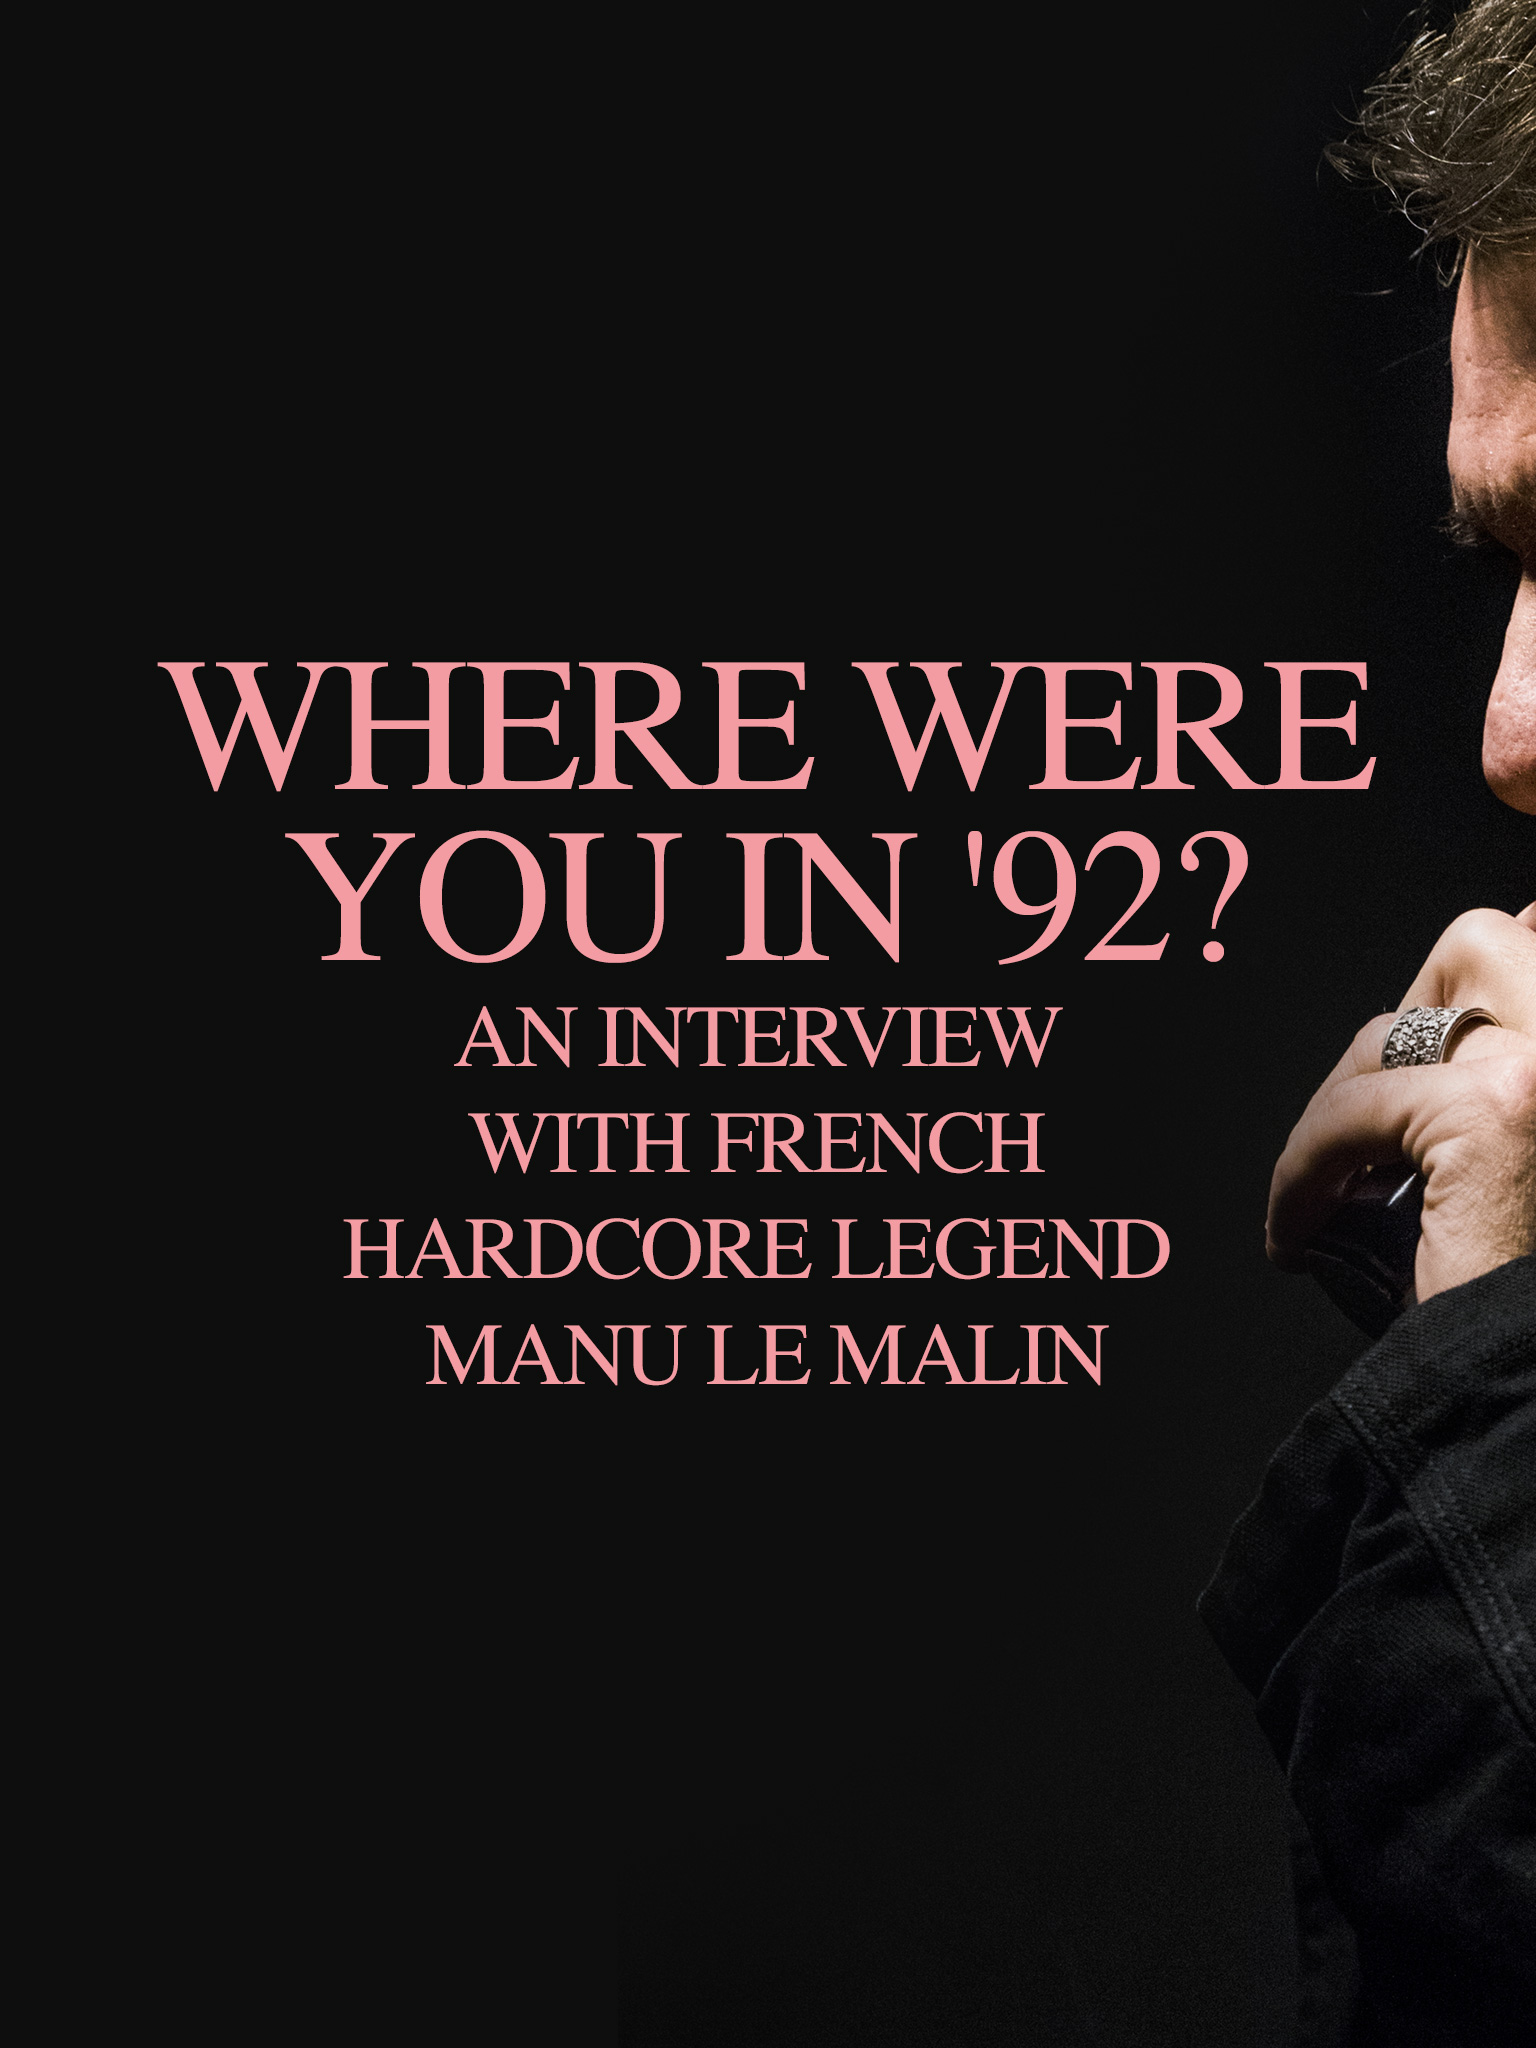 Where were you in '92? An interview with French hardcore legend Manu Le Malin